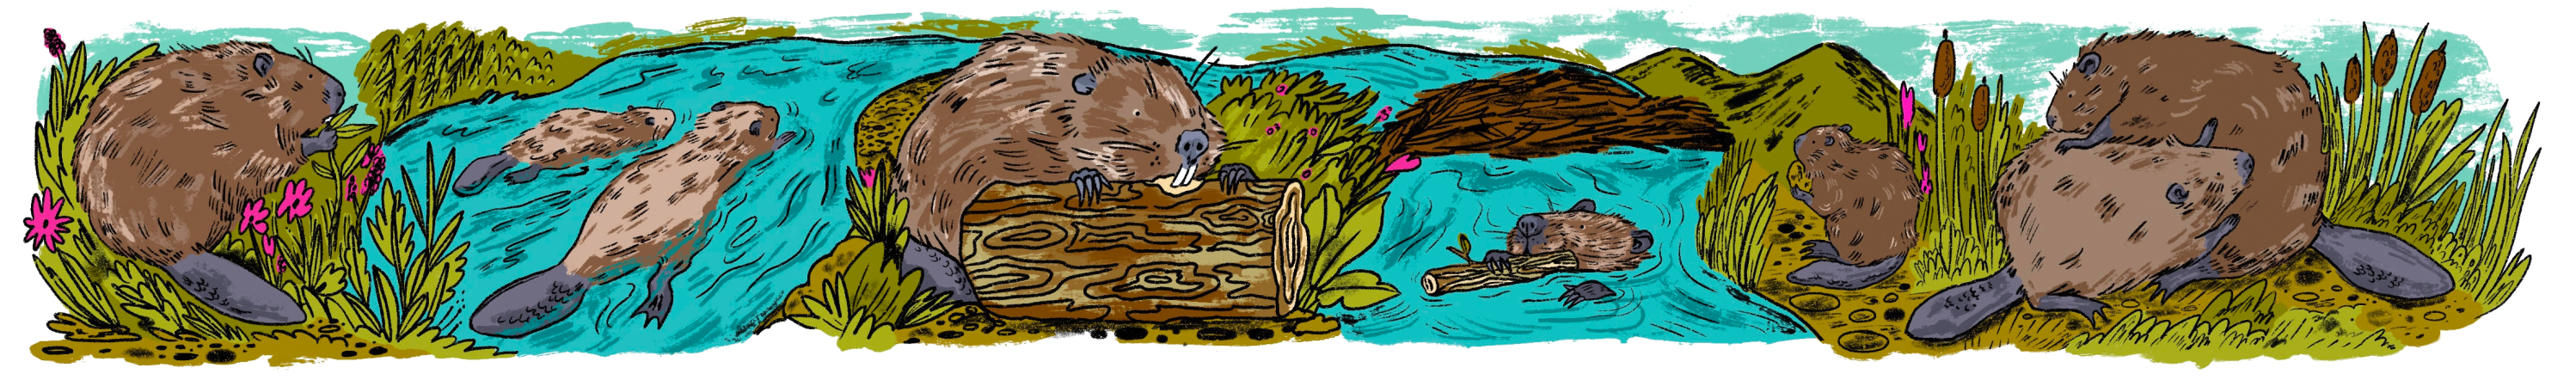 long scene of beavers in a natural environment swimming, chewing wood and grooming